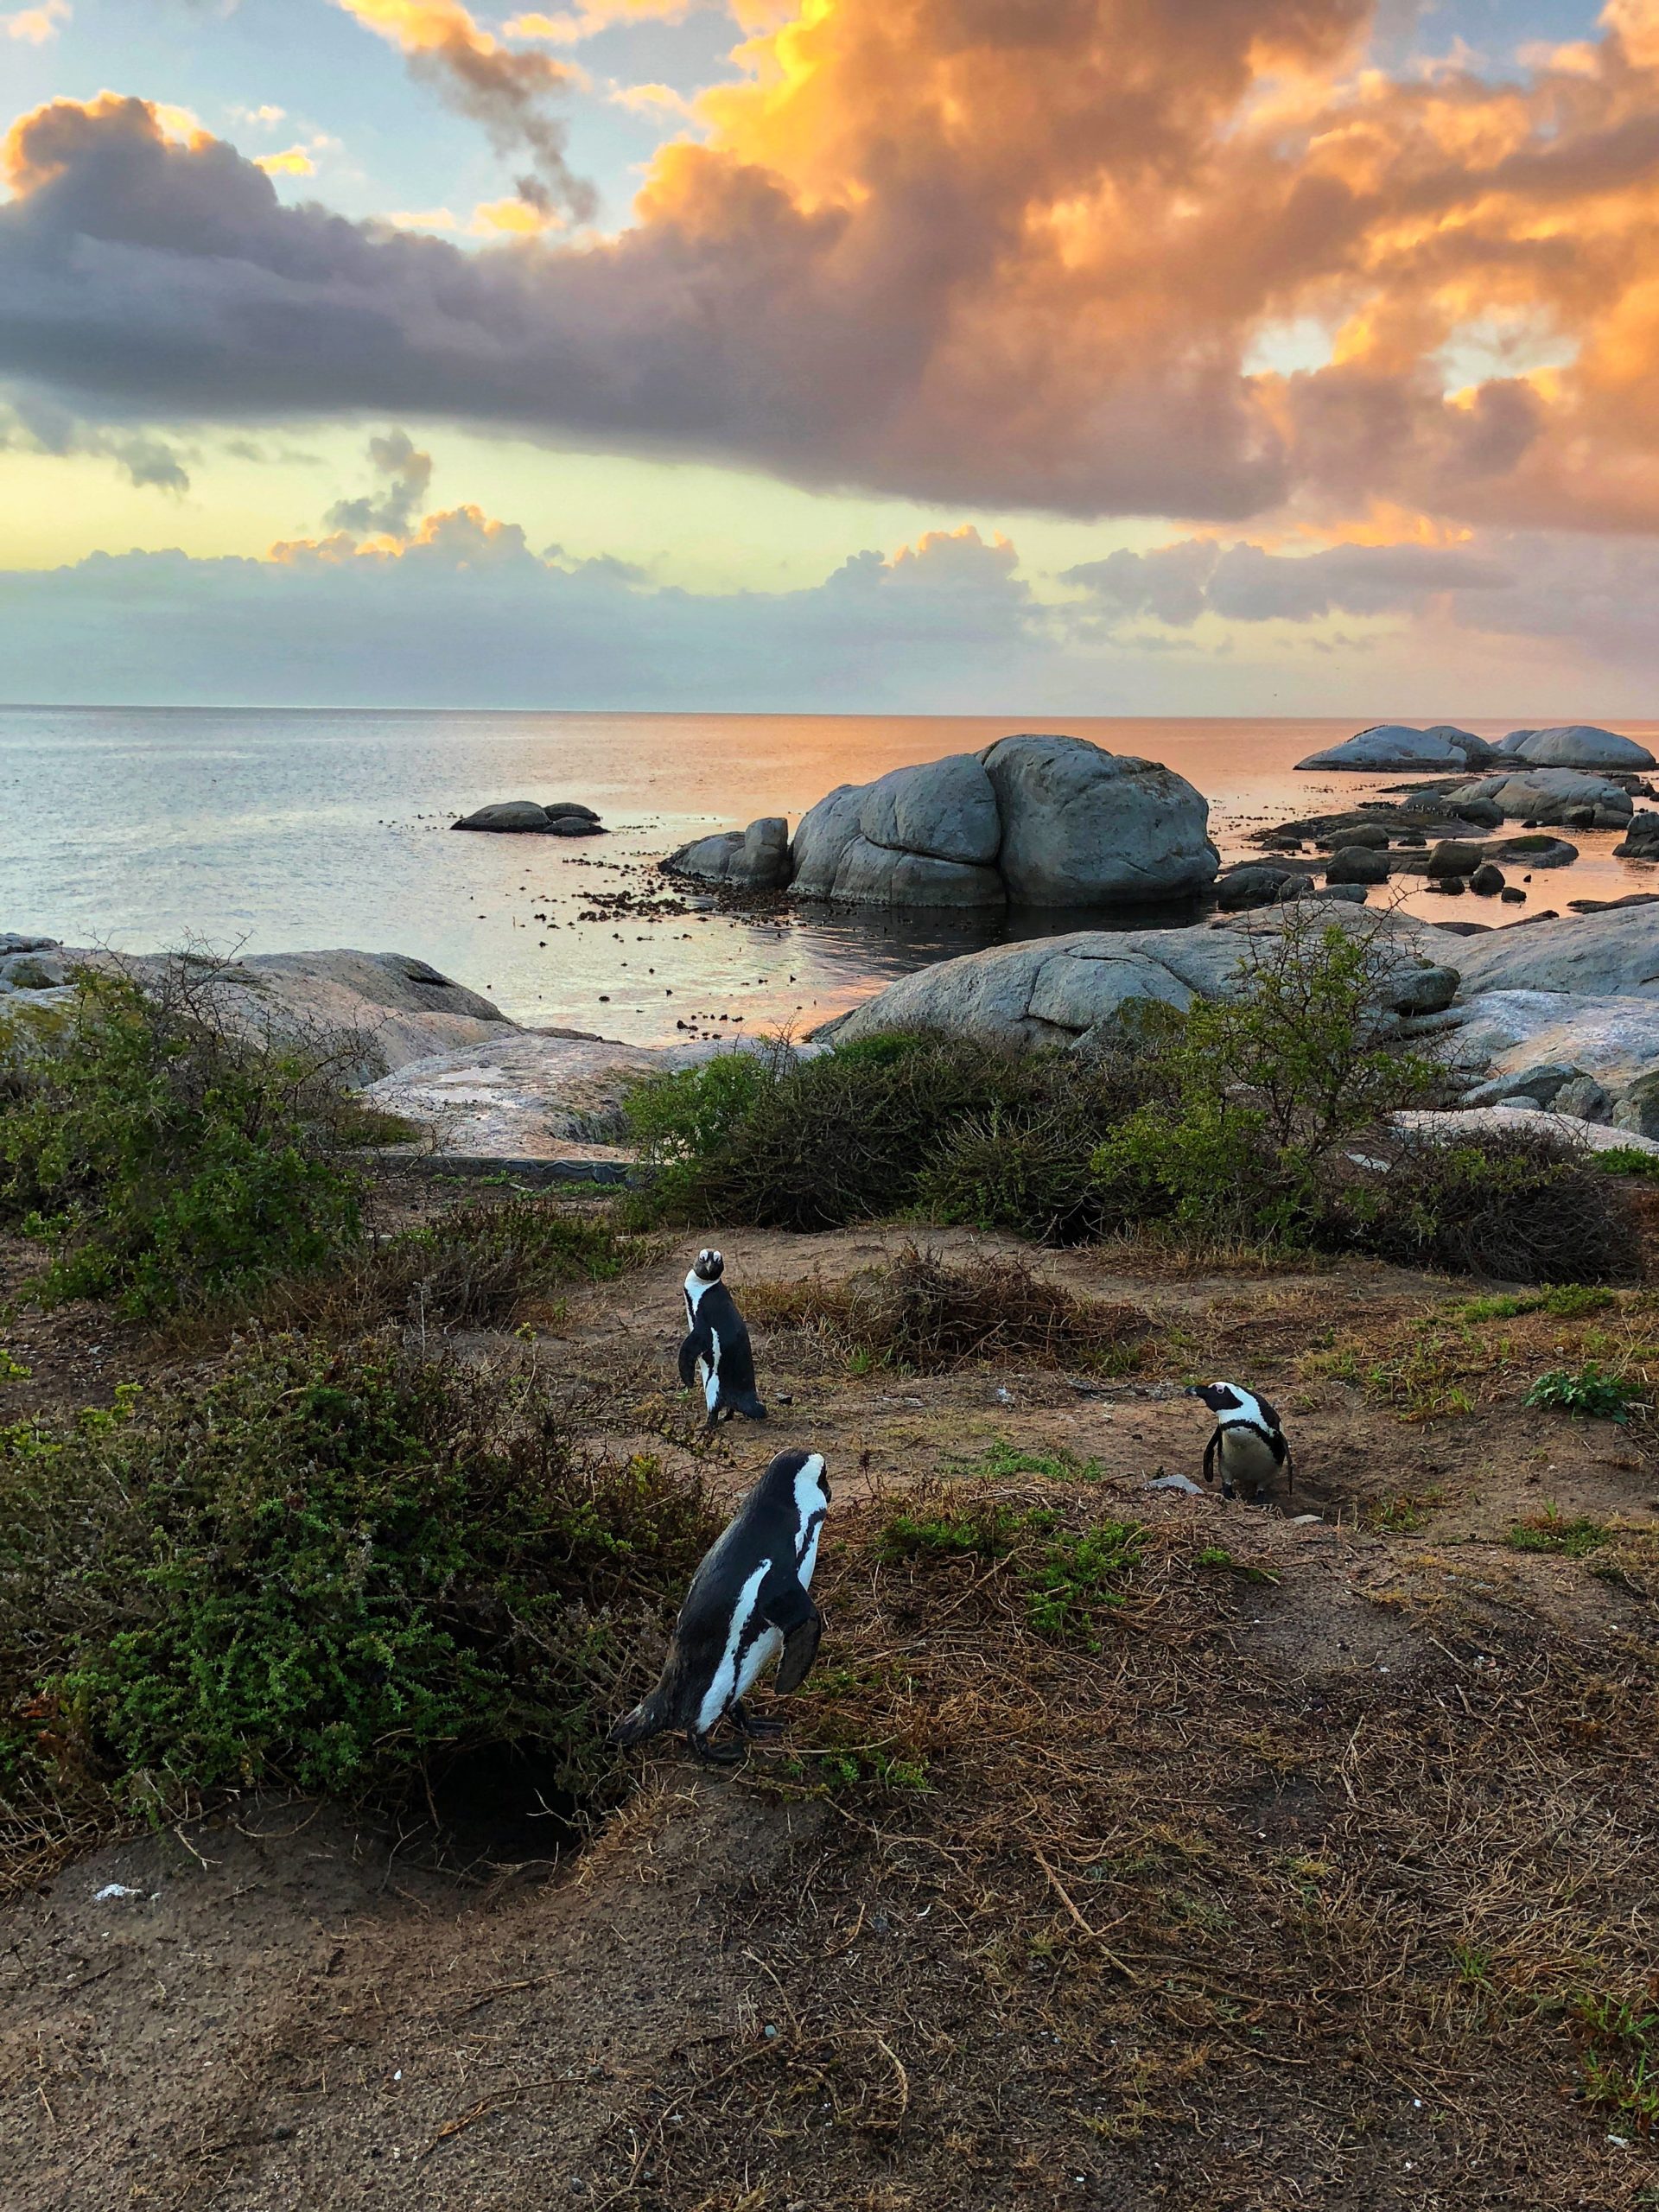 African penguins walk near the shore in Cape Town South Africa